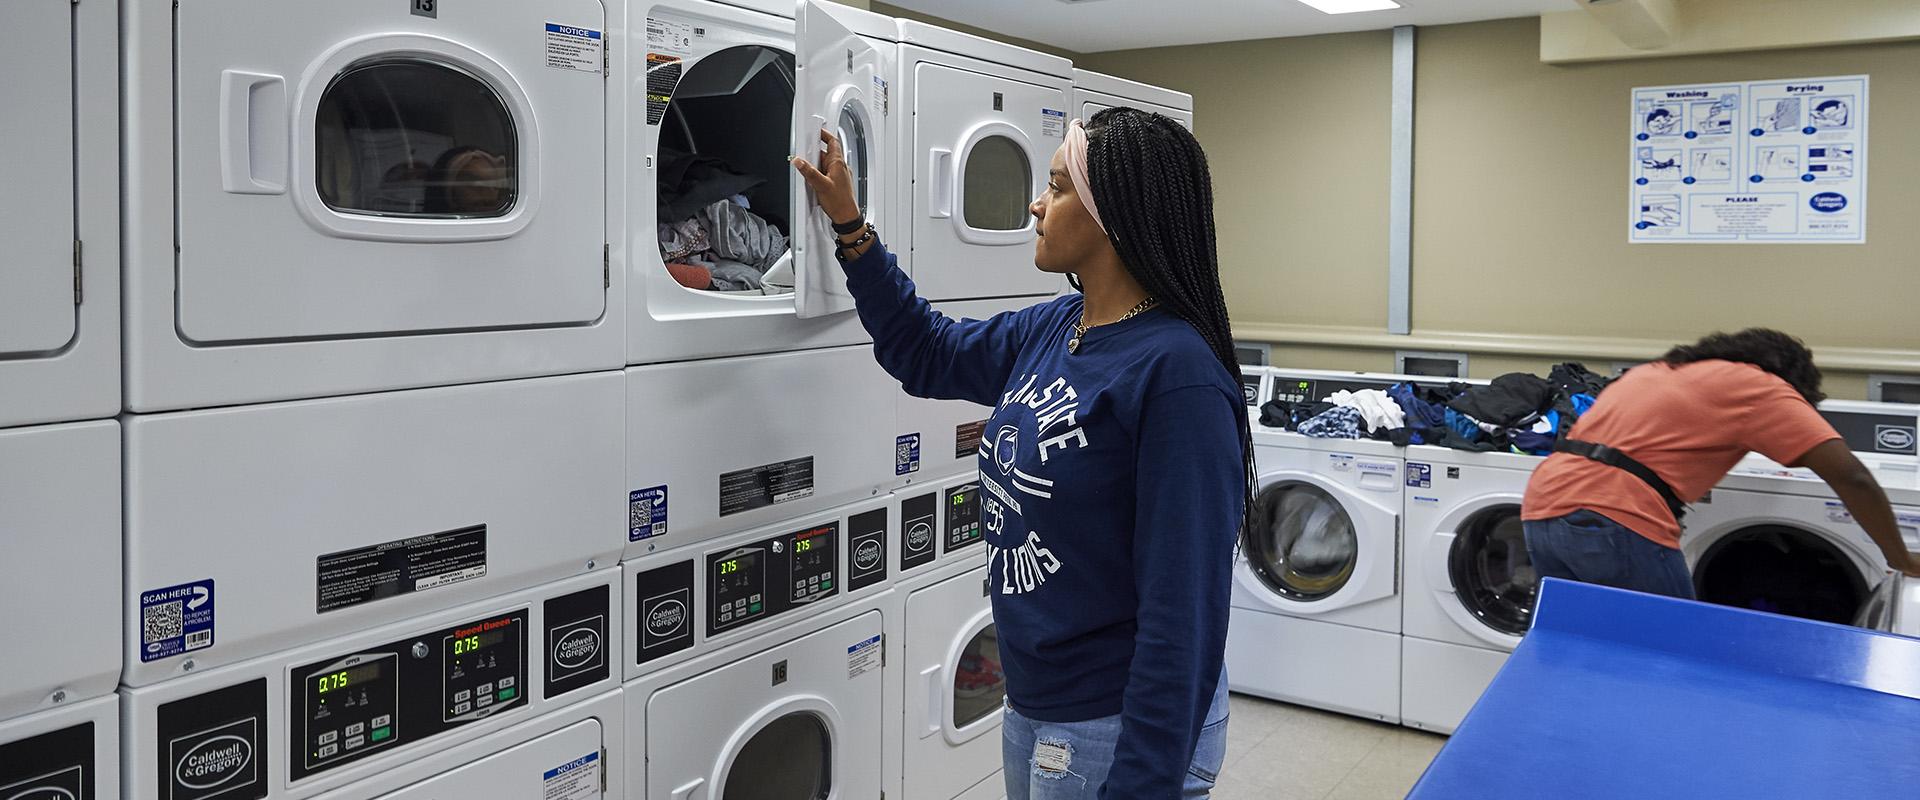 Student checking laundry in Bowman Hall